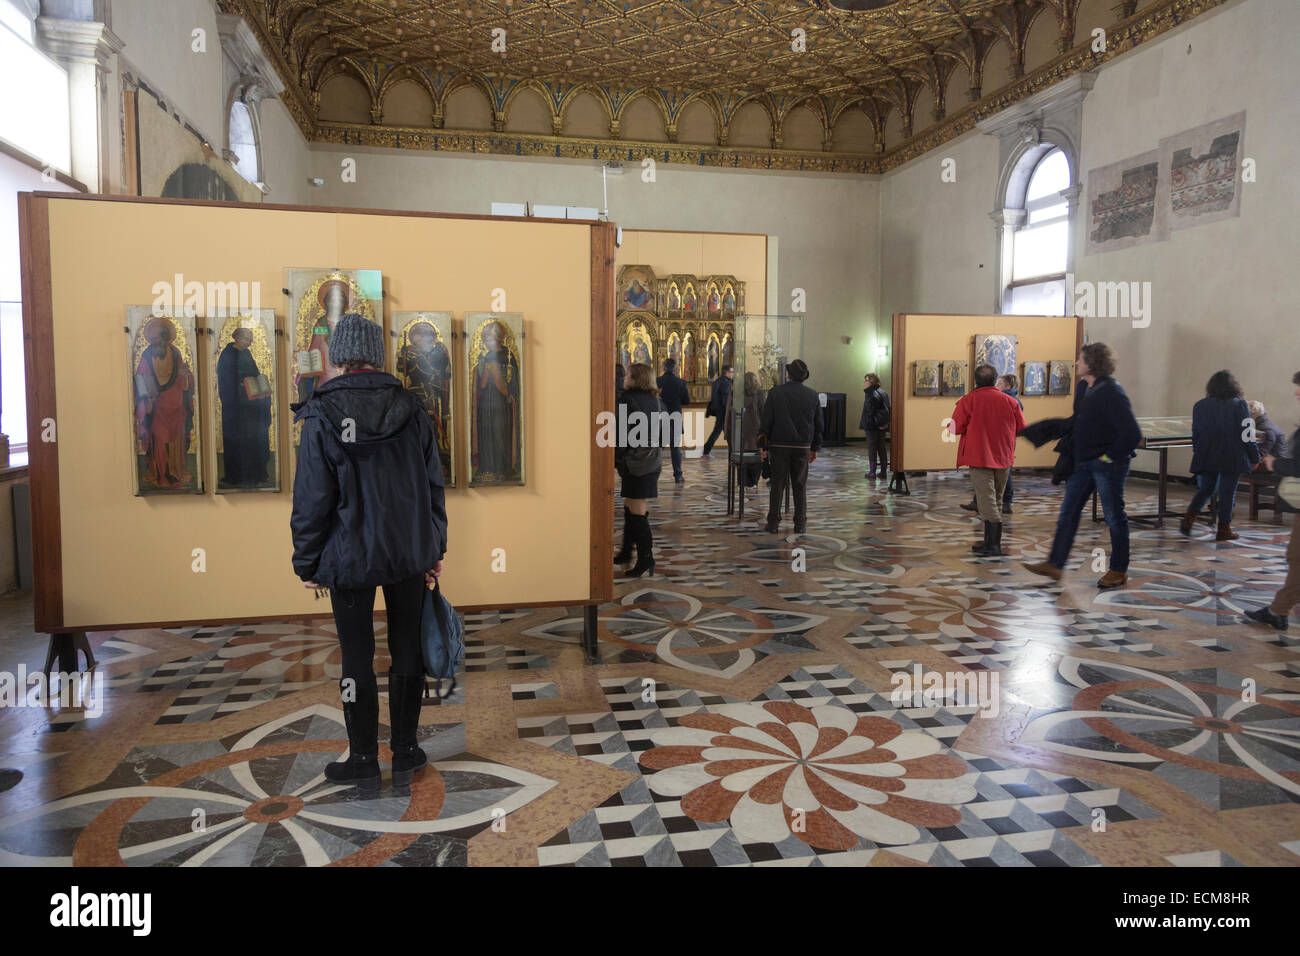 visitors looking at paintings, Gallerie dell'Accademia, Venice, Italy Stock Photo